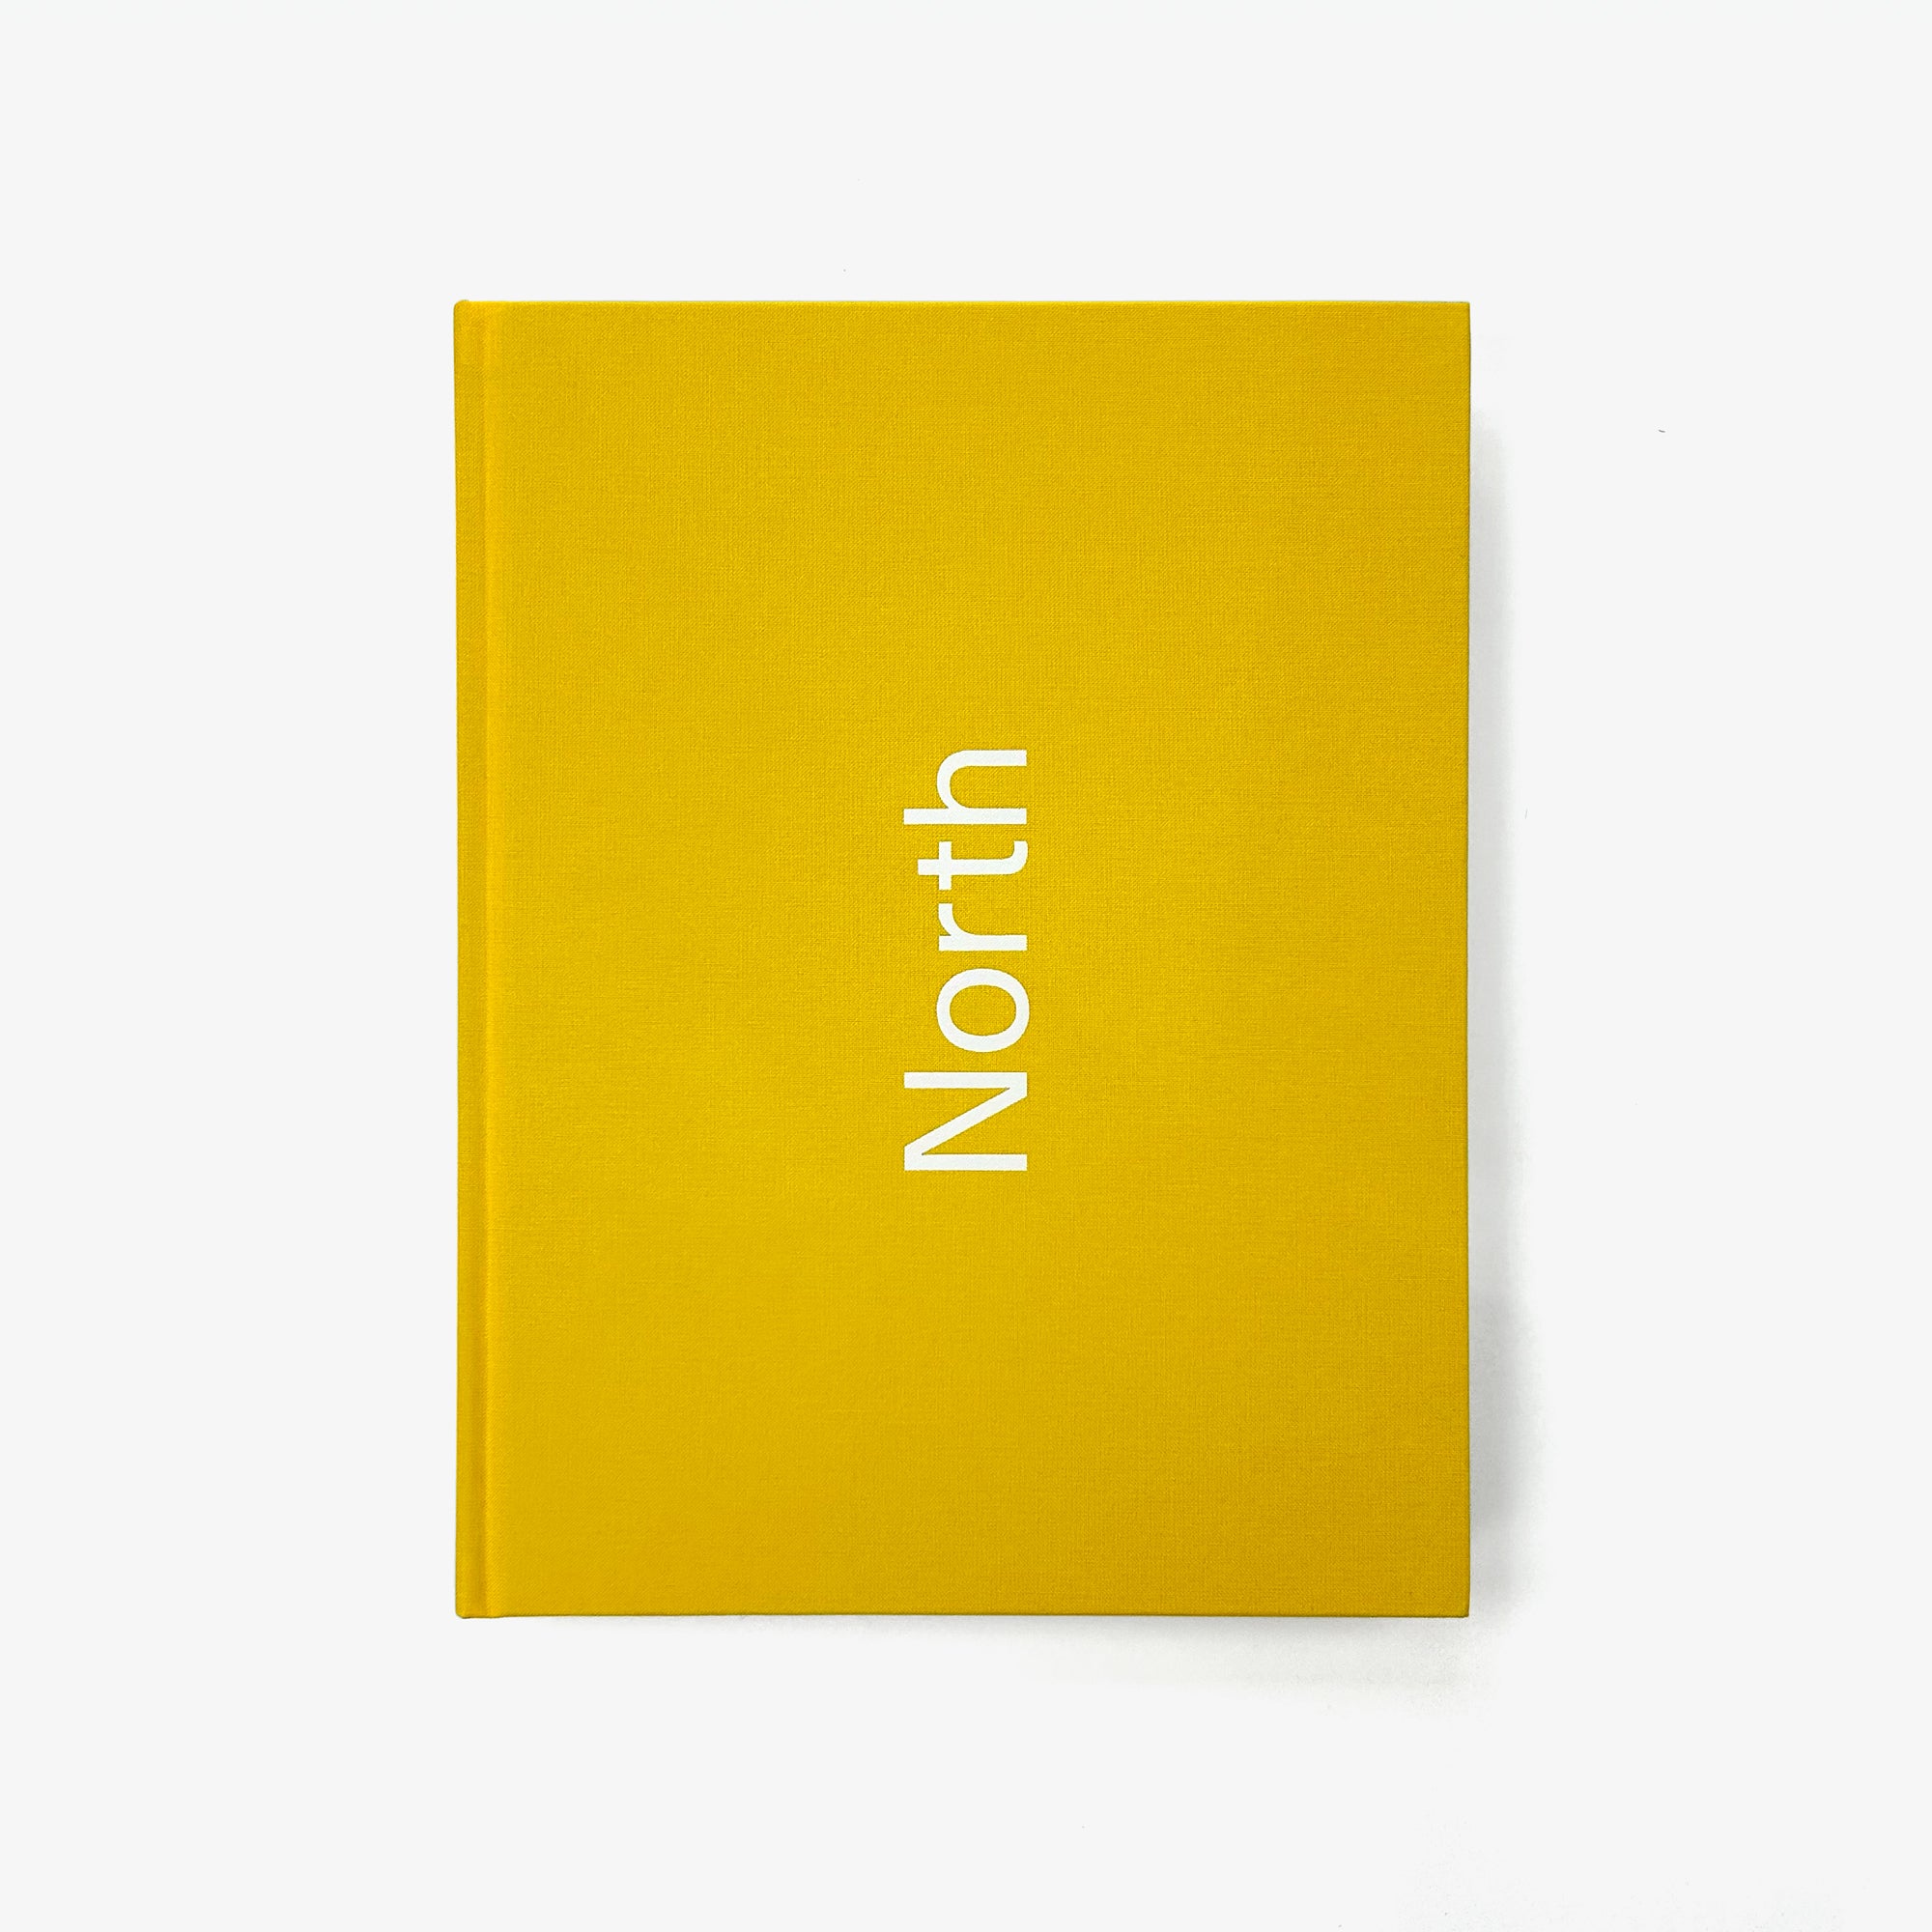 North: Extracts from visual identities